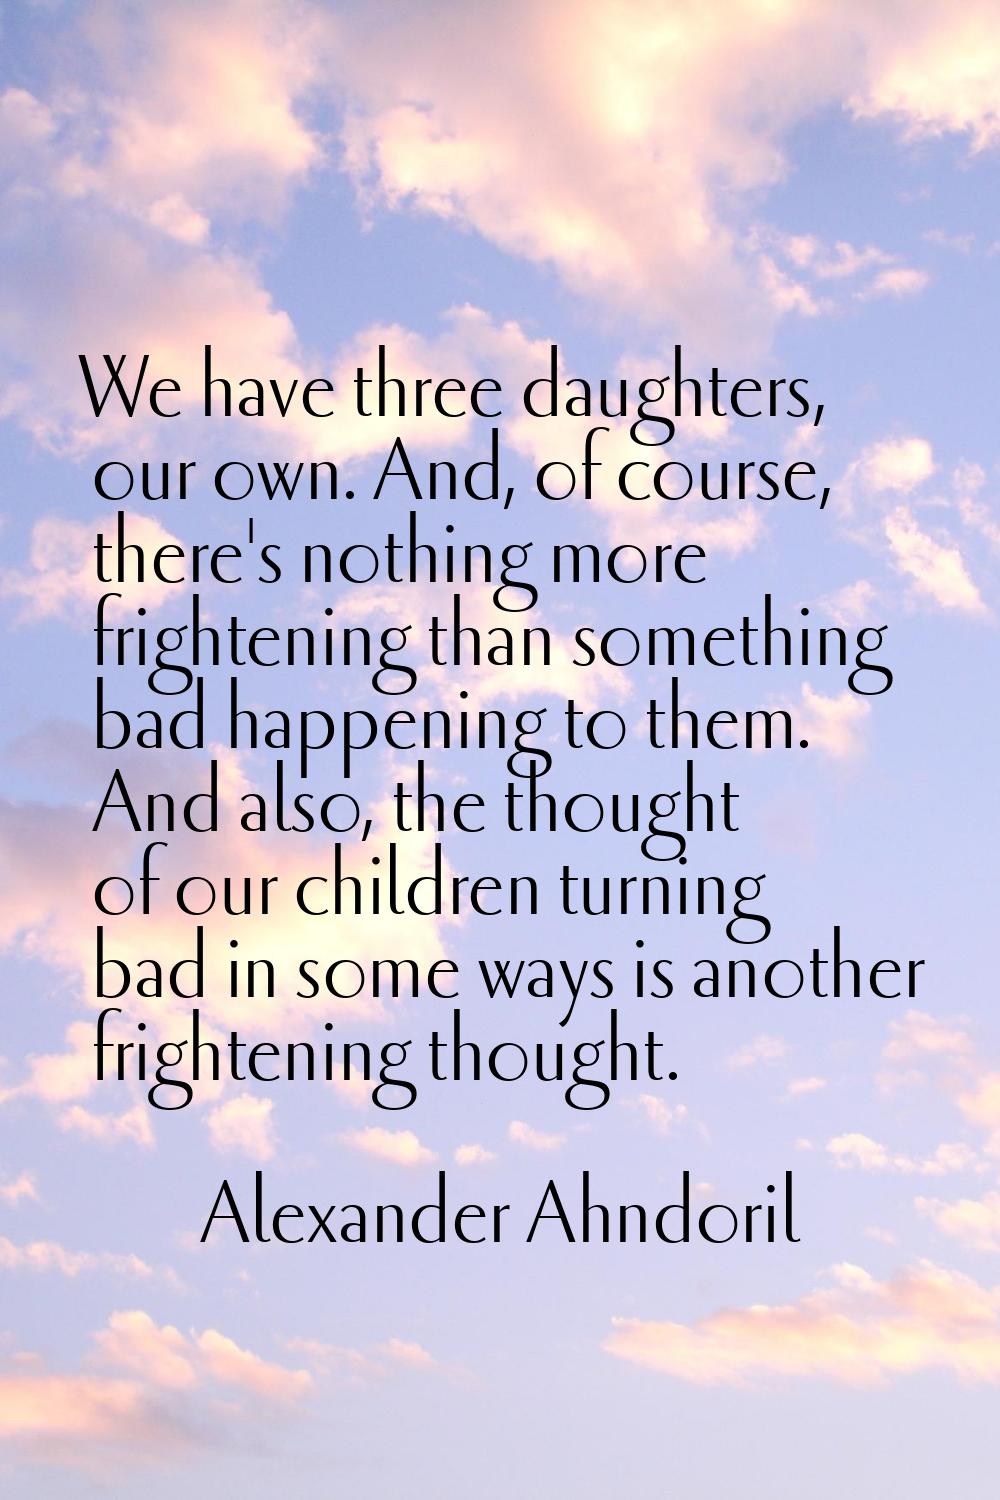 We have three daughters, our own. And, of course, there's nothing more frightening than something b